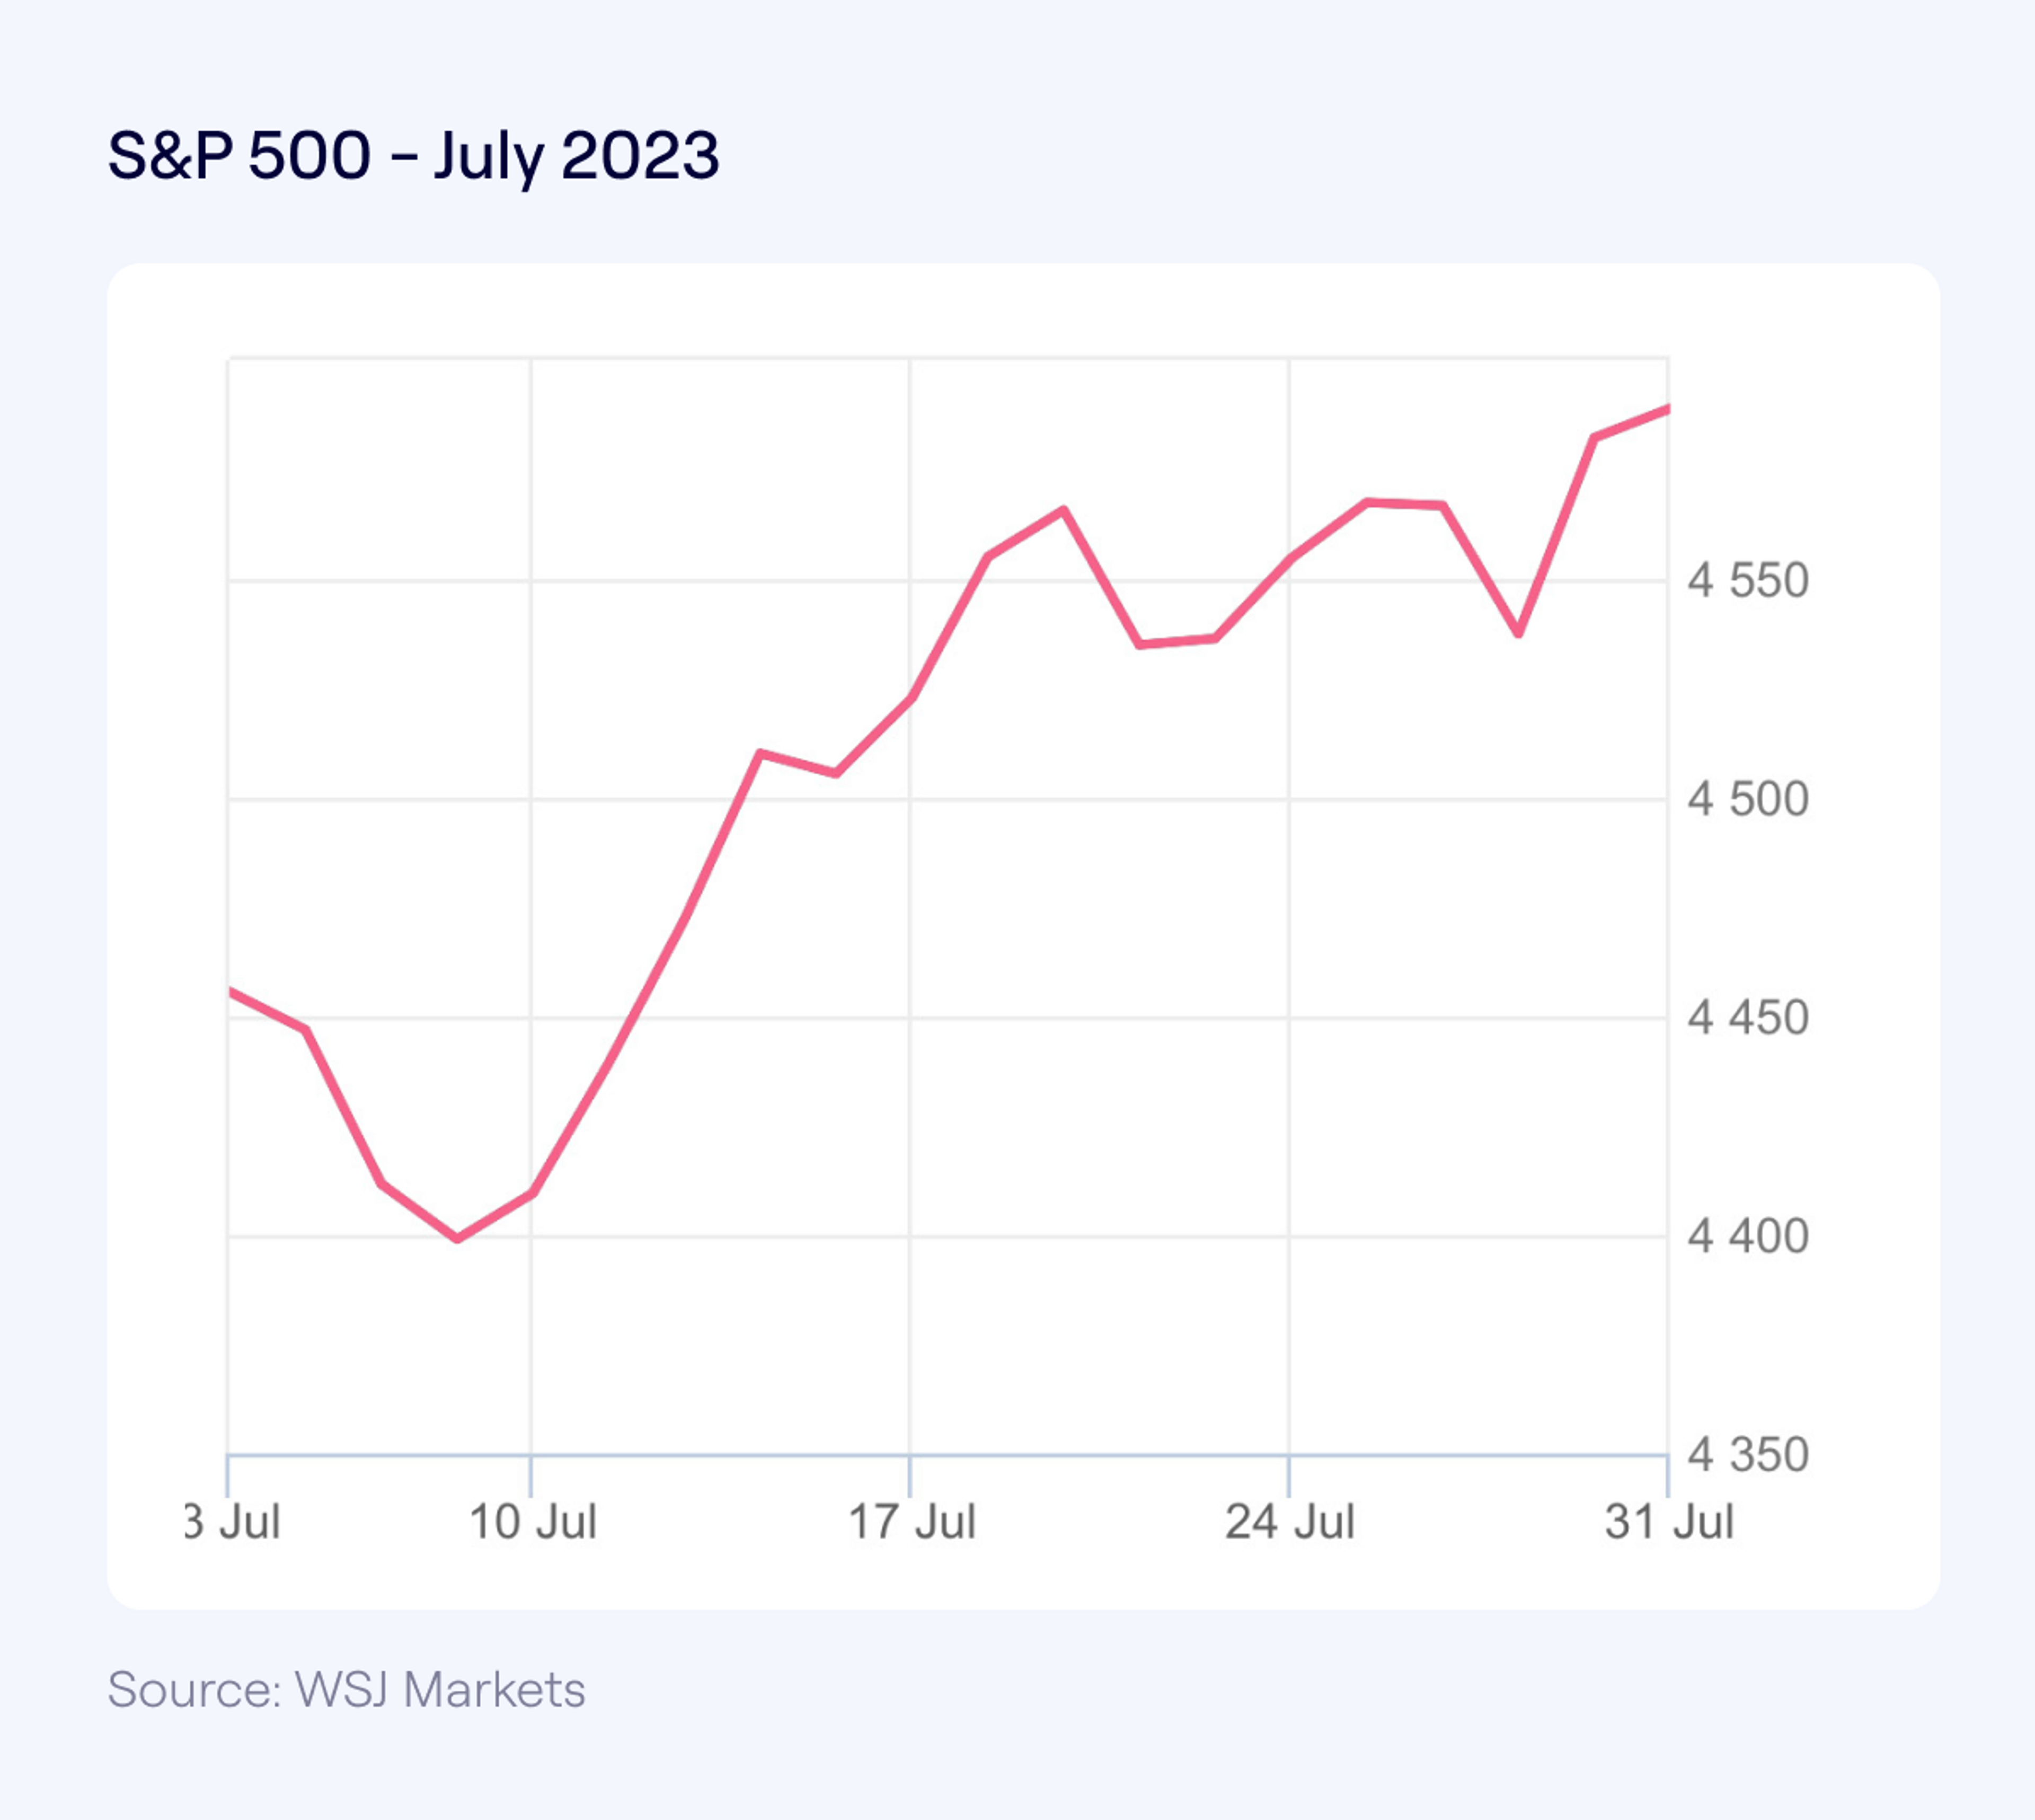 Line chart showing S&P 500 performance in July 2023